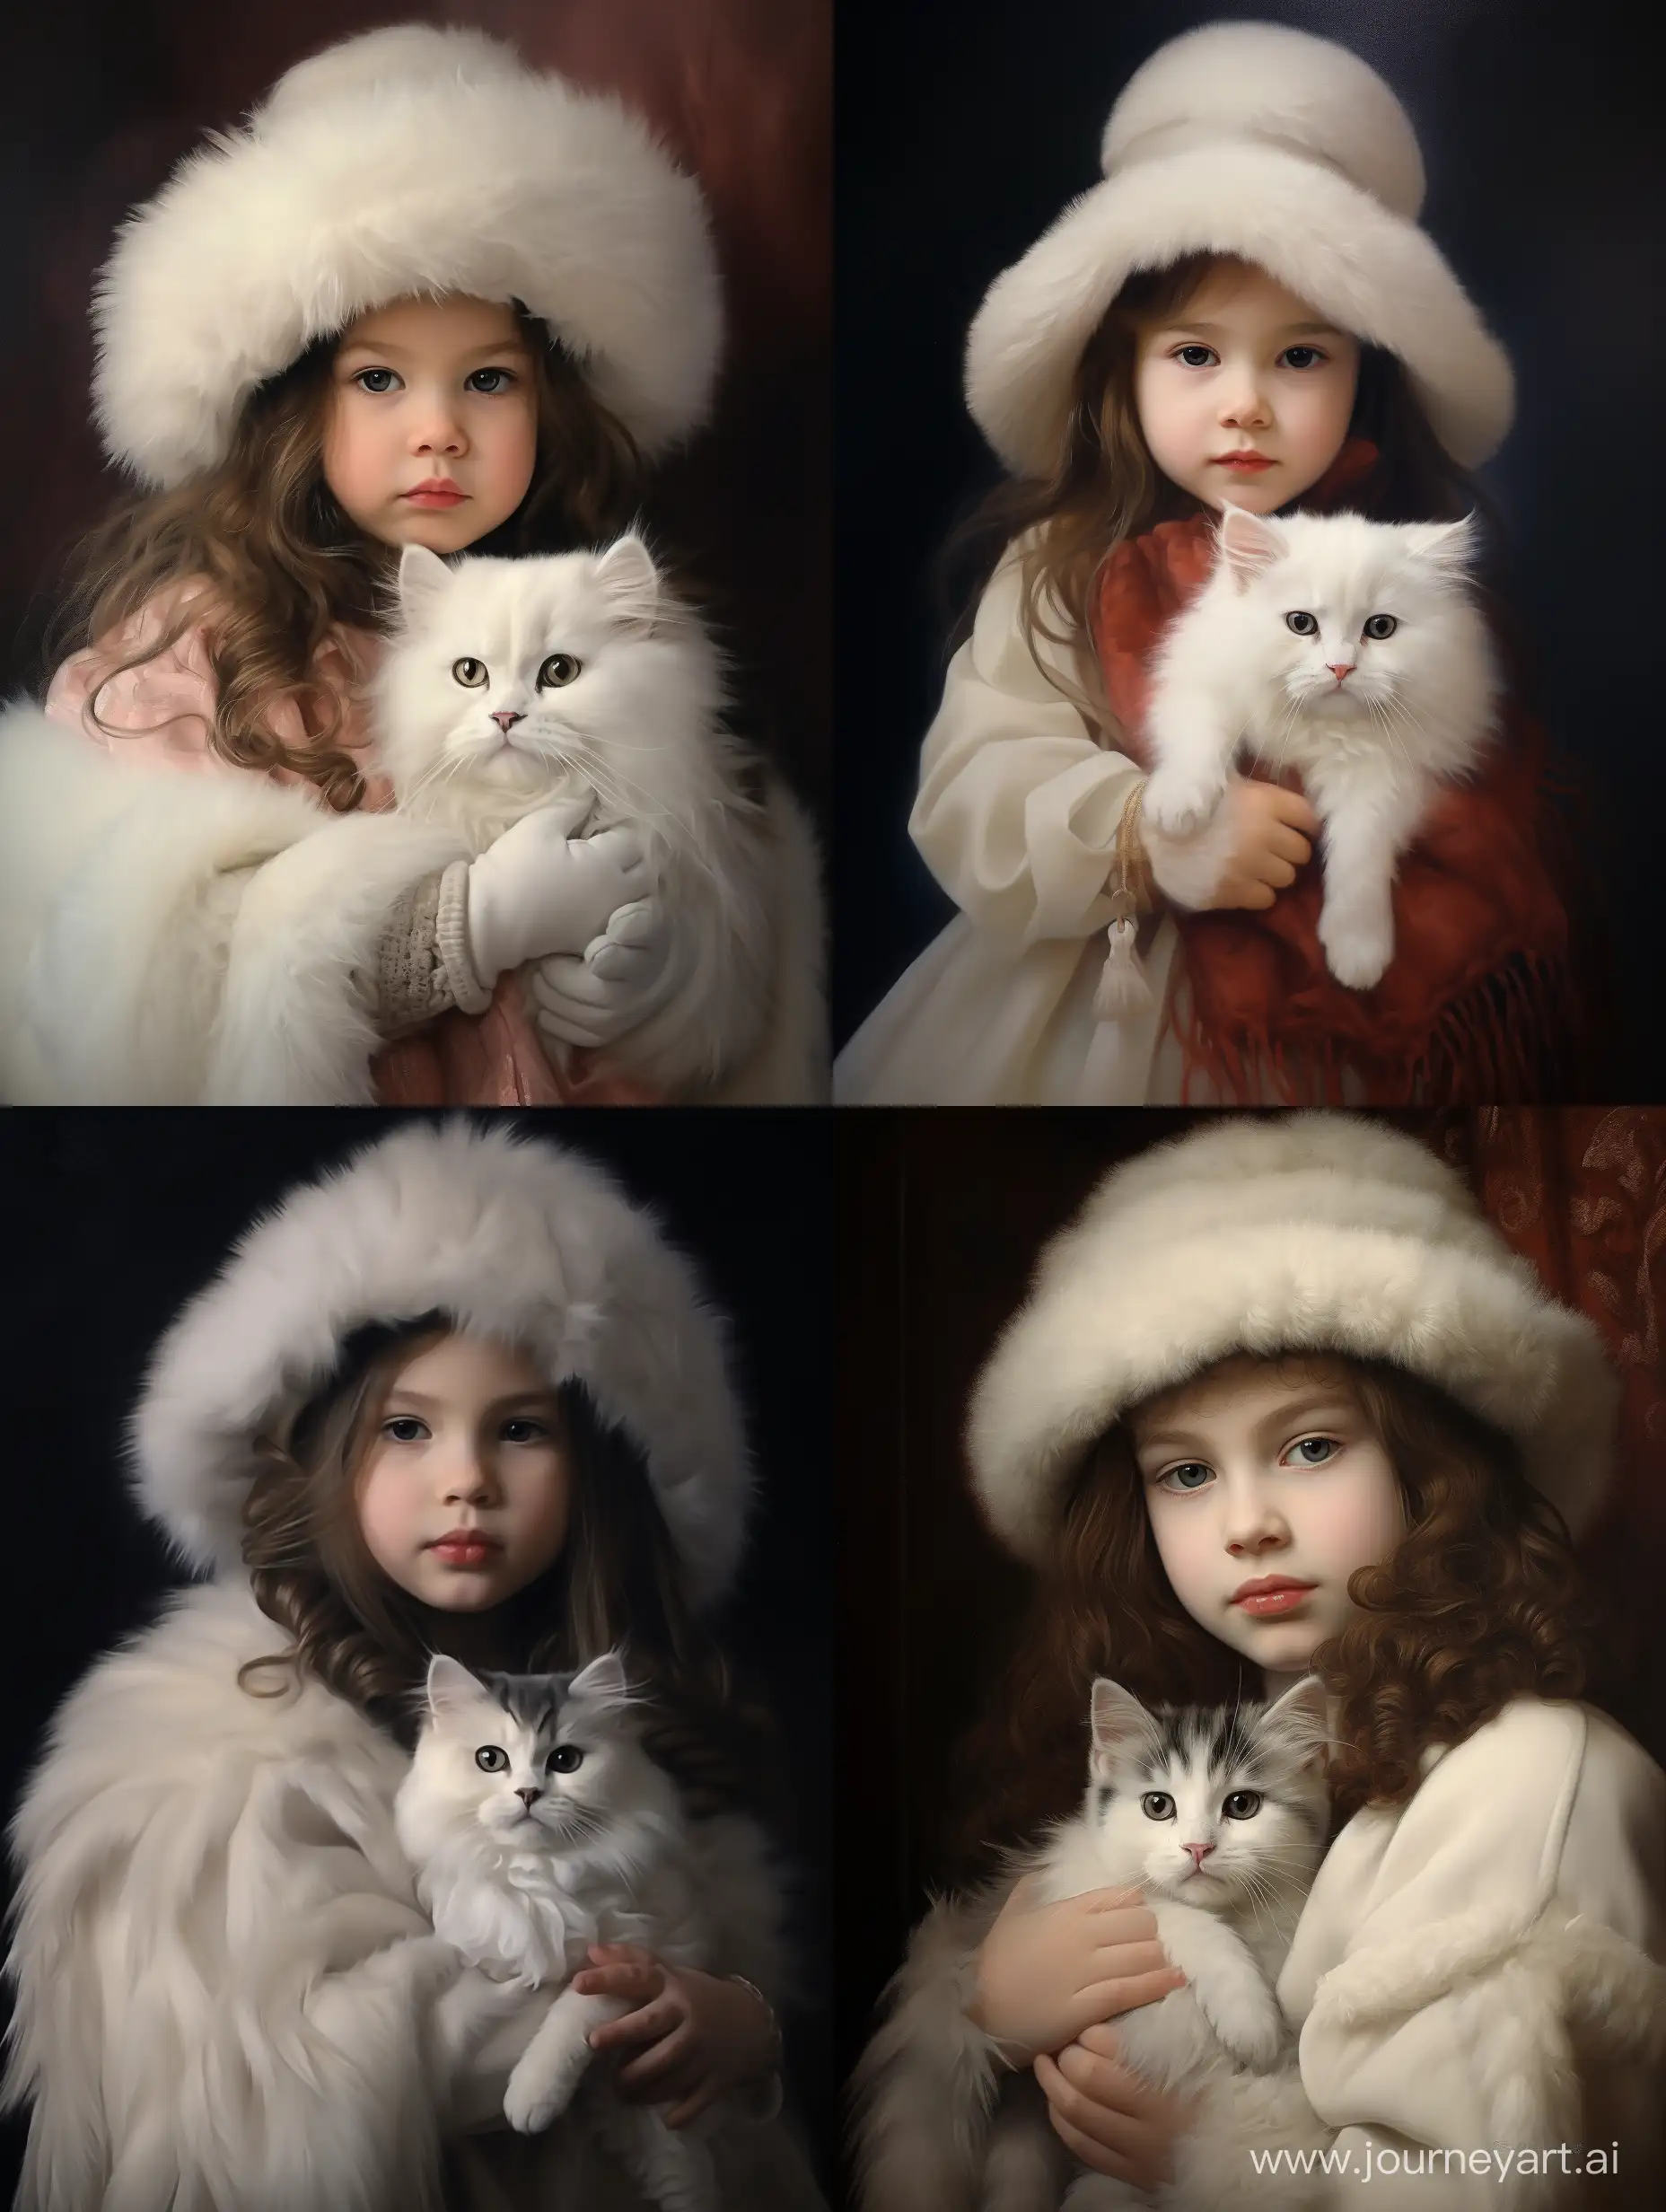 Adorable-Little-Girl-in-Fur-Coat-and-Hat-Cuddling-a-White-Cat